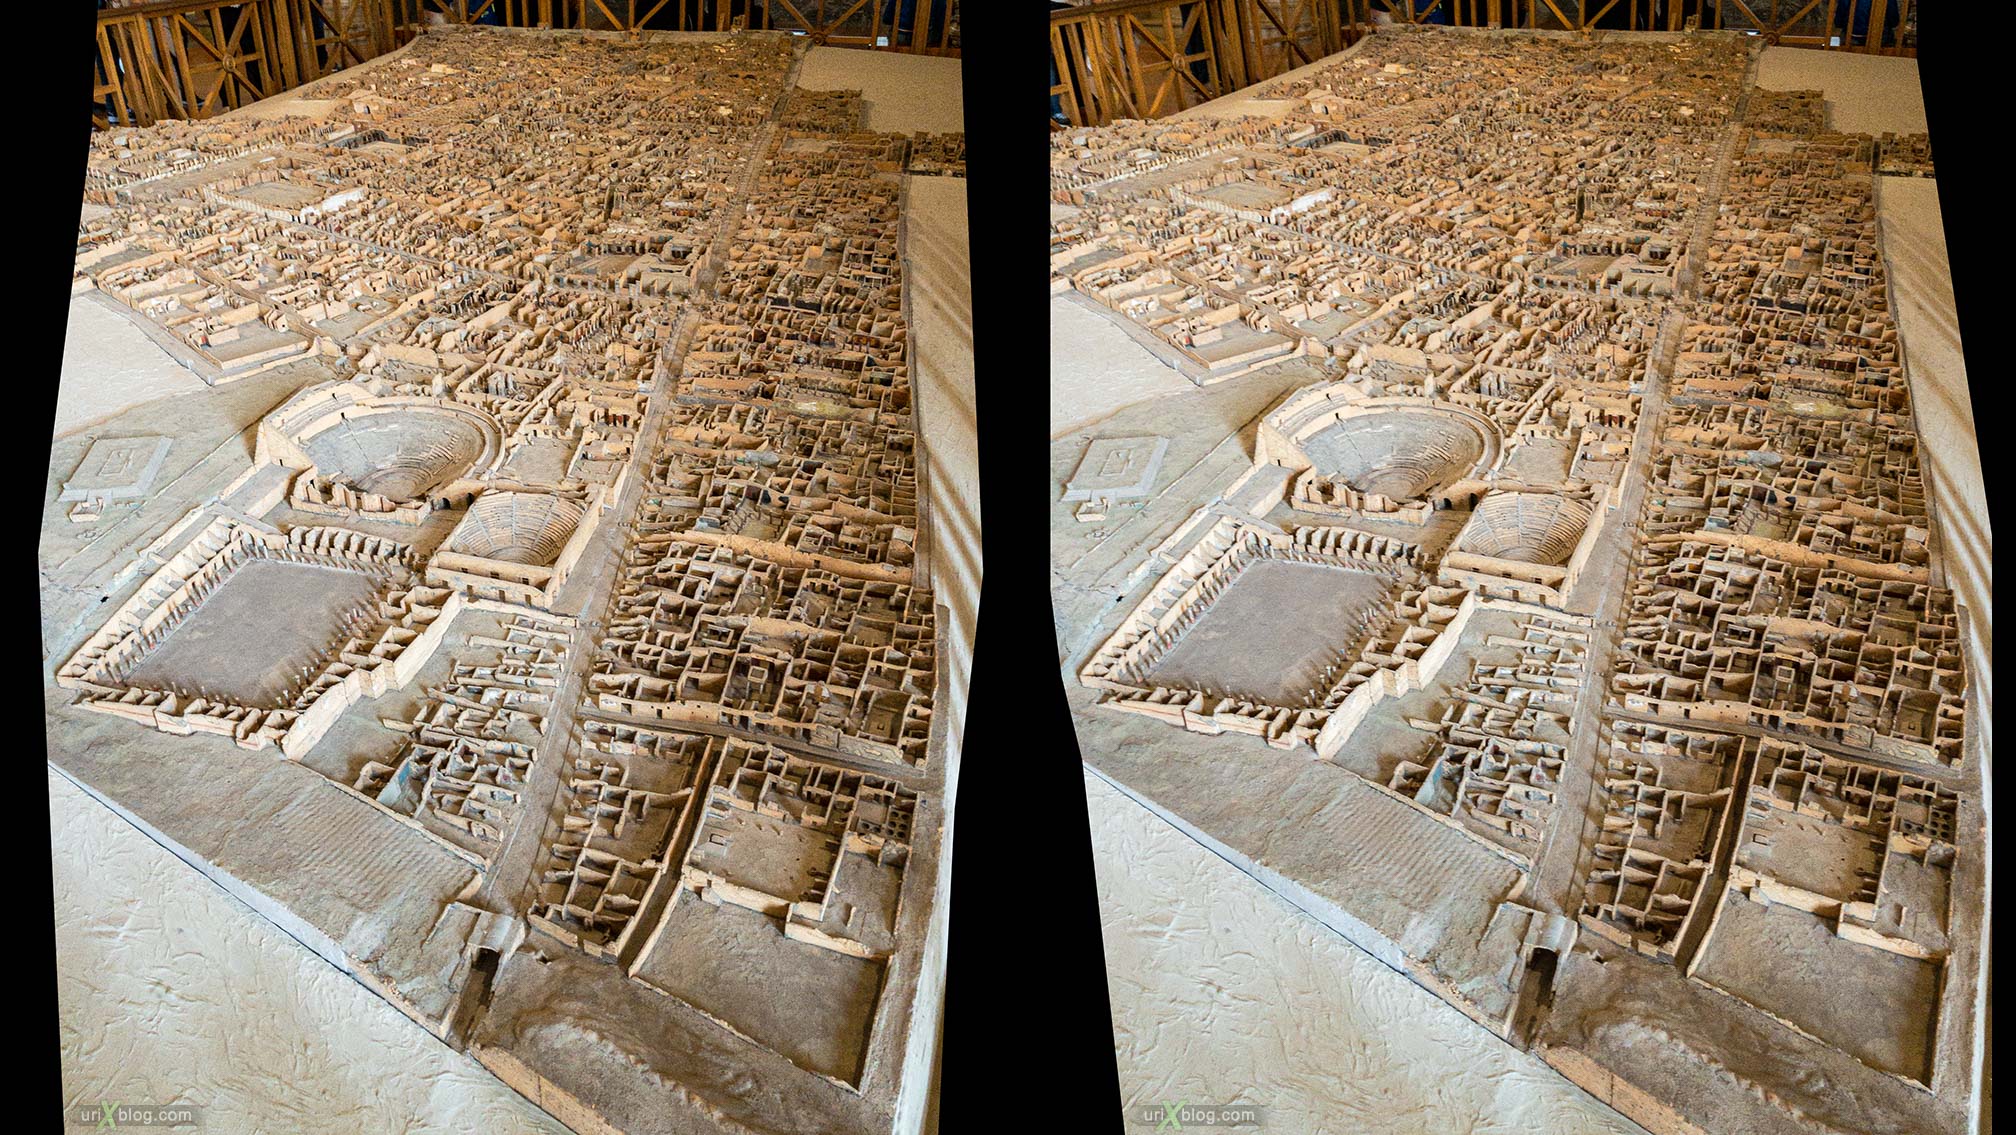 model, map, National Archaeological Museum of Naples, ancient Rome, Pompei, exhibition, Naples, Italy, 3D, stereo pair, cross-eyed, crossview, cross view stereo pair, stereoscopic